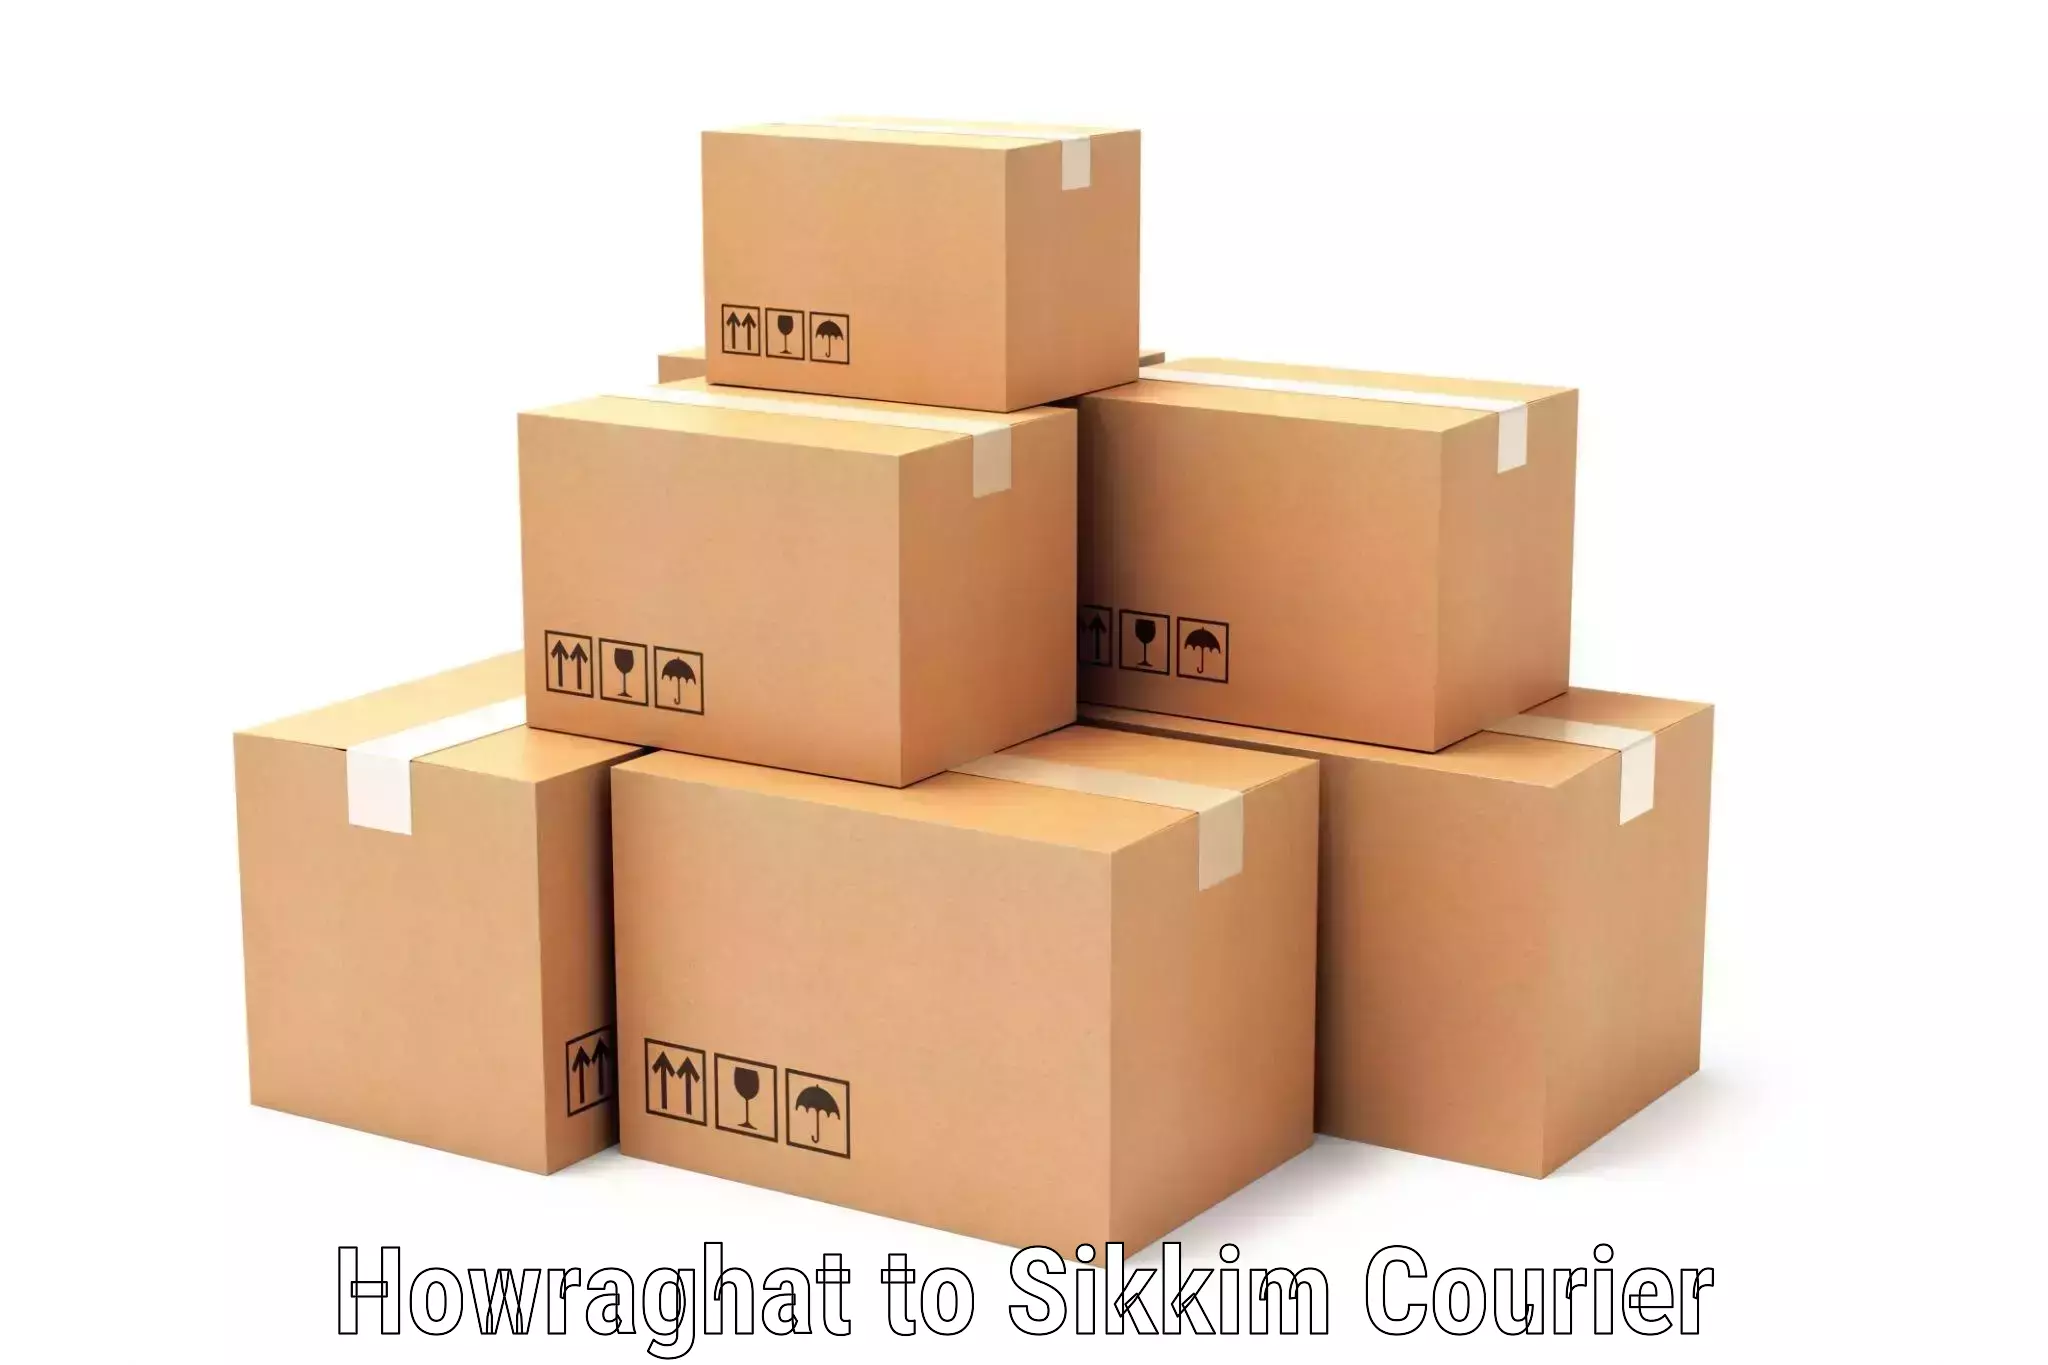 High-capacity courier solutions Howraghat to NIT Sikkim